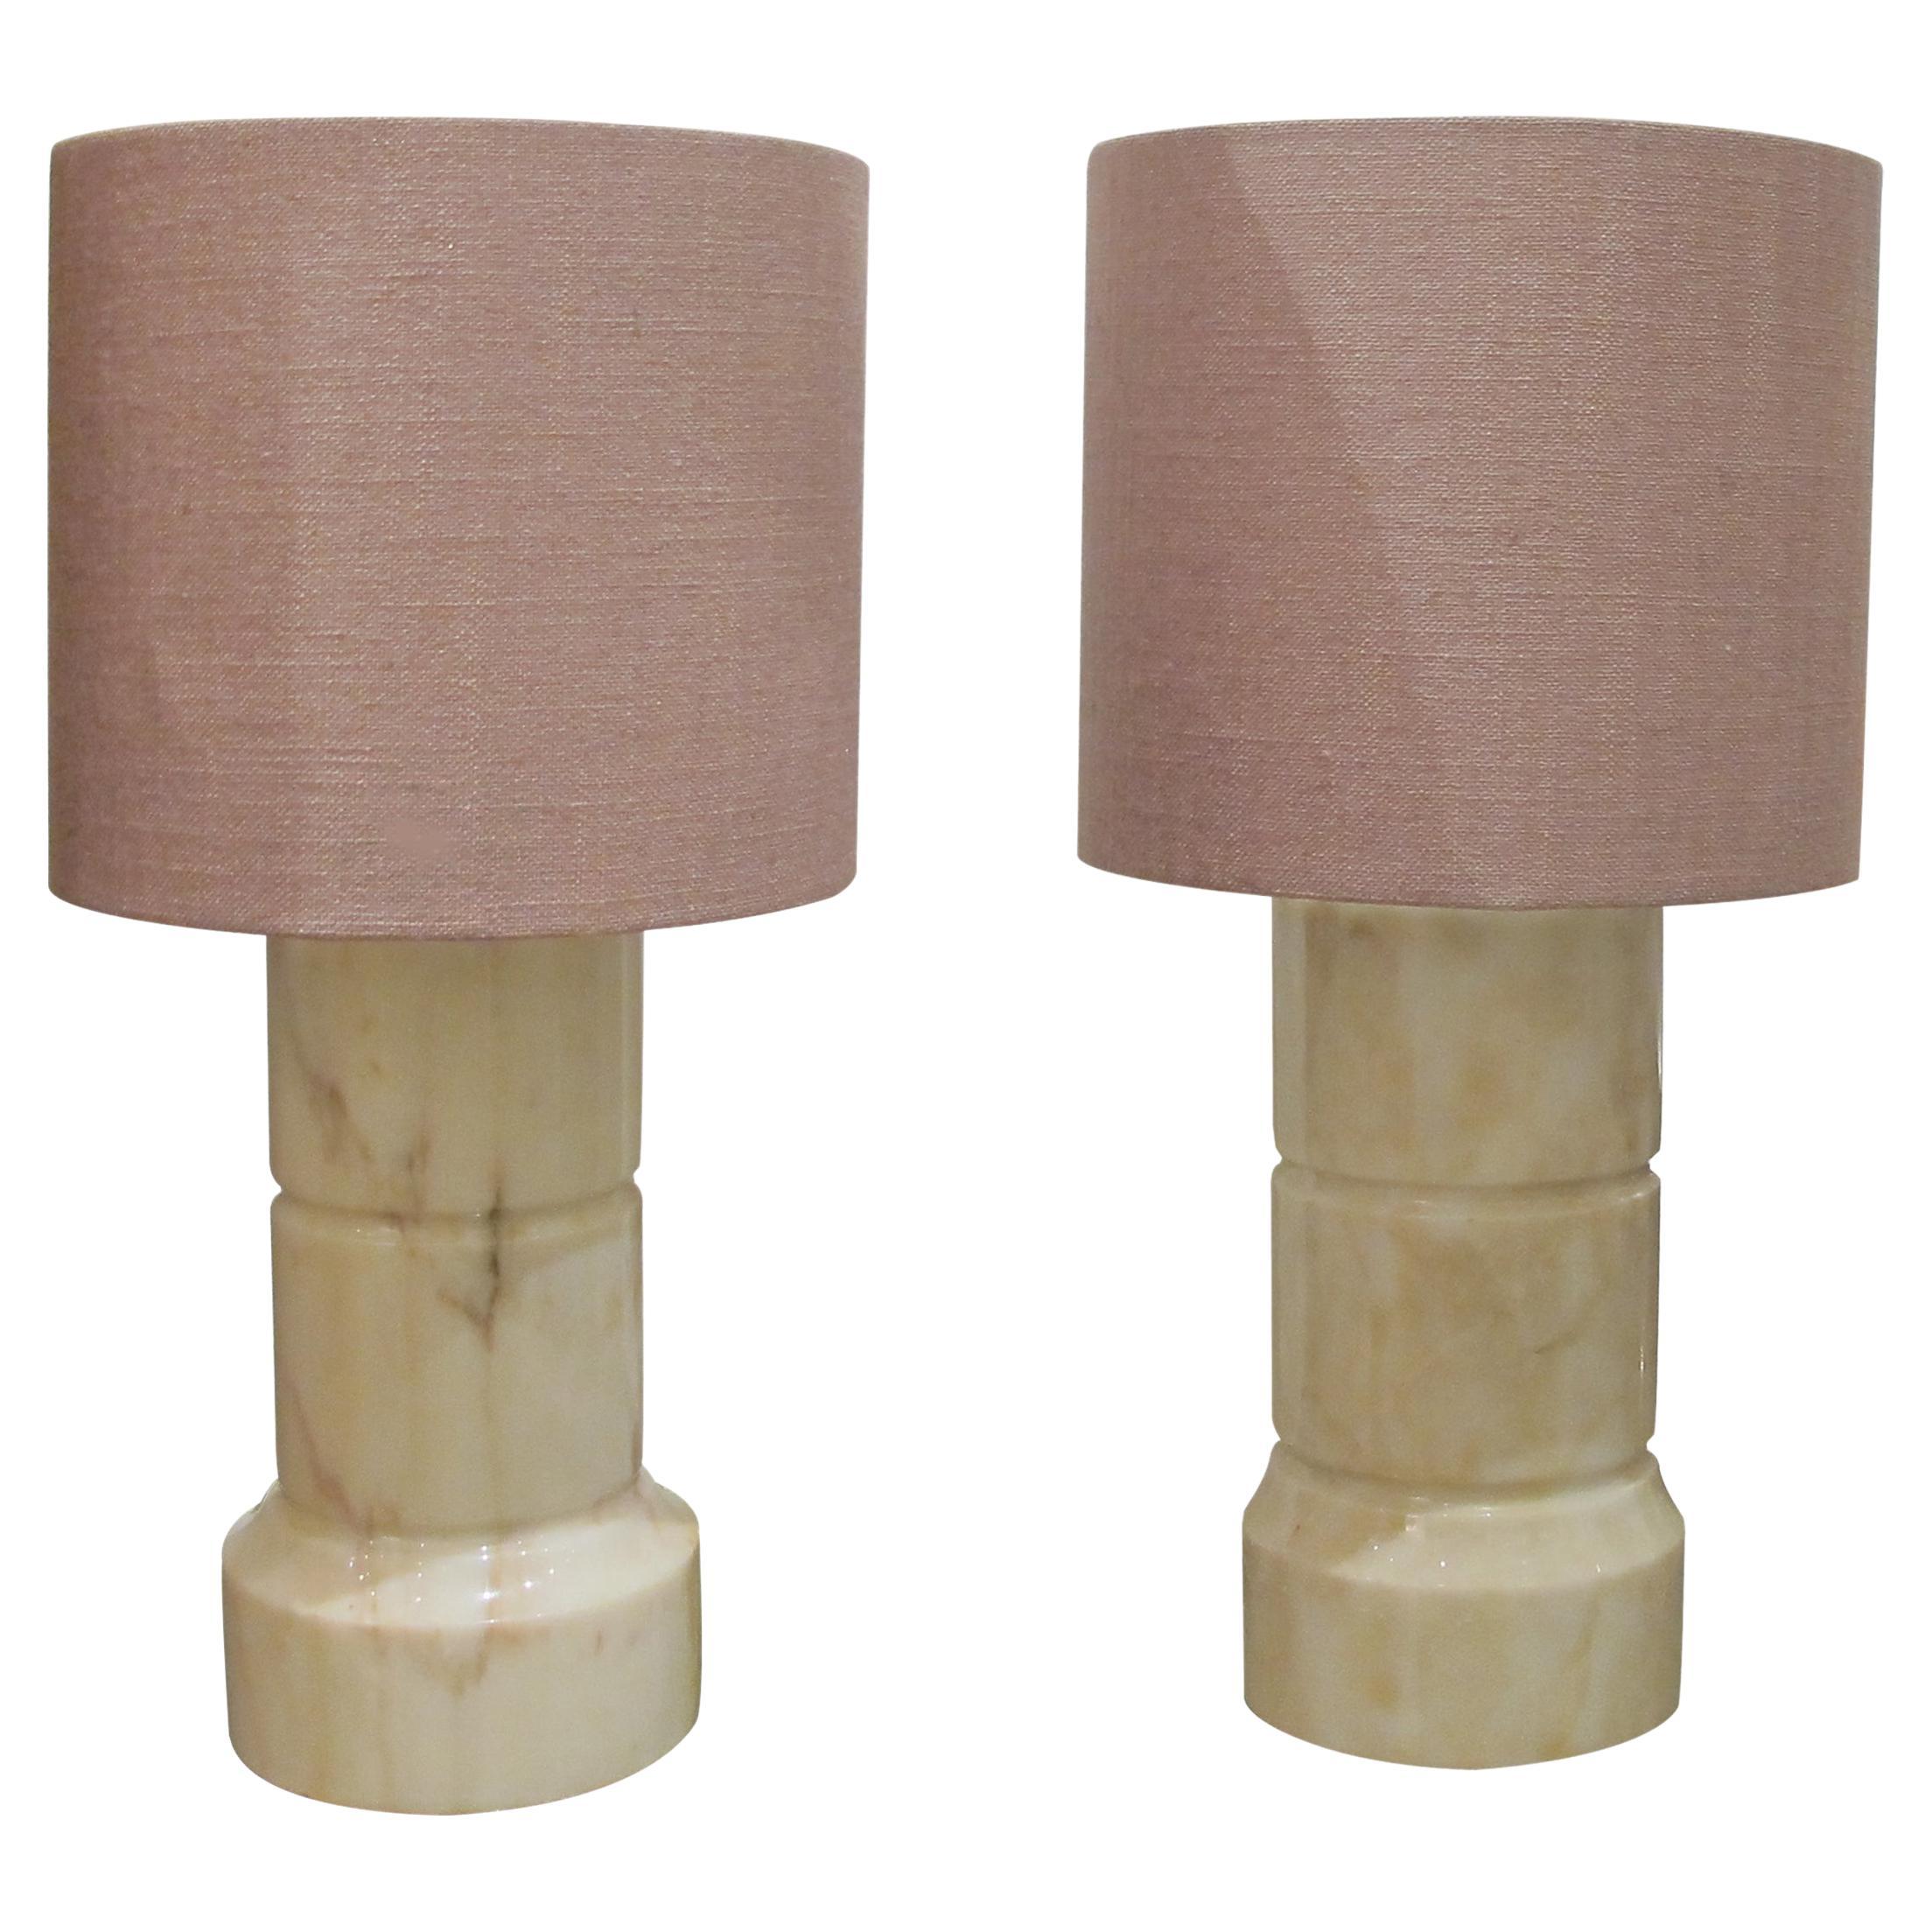 1960s Pair of Cream Marble Cylinder Table Lamps, Italian